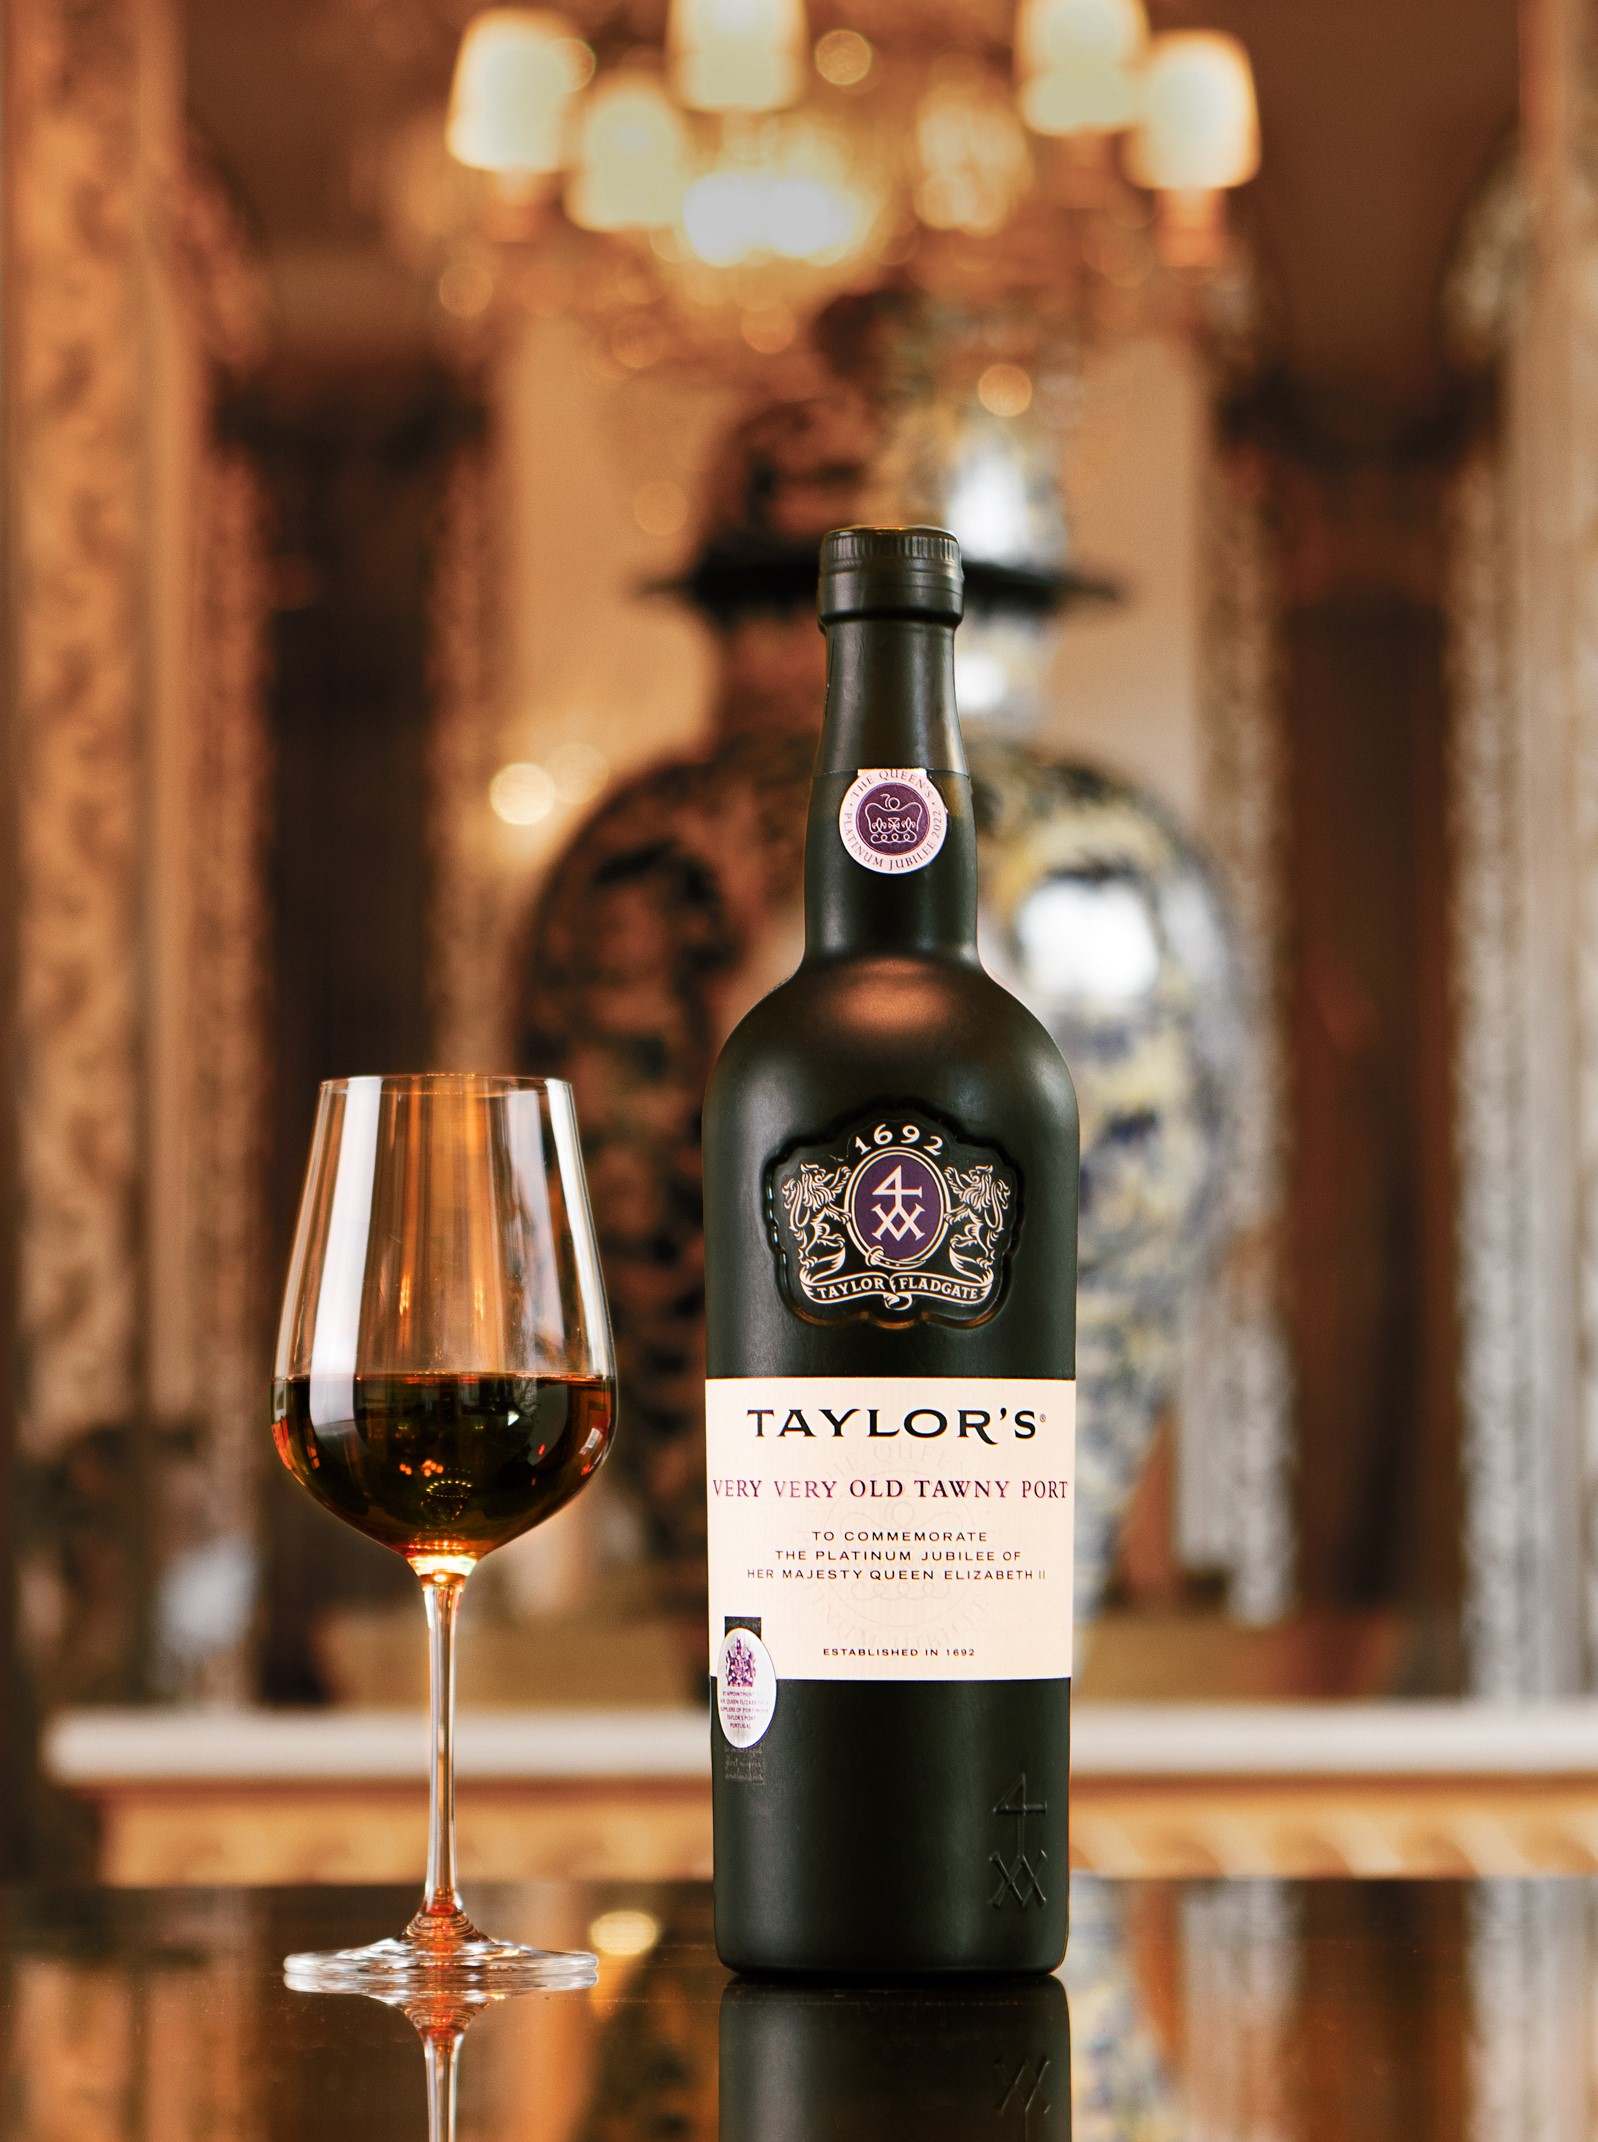 Taylor's celebrates platinum jubilee with very very old tawny port